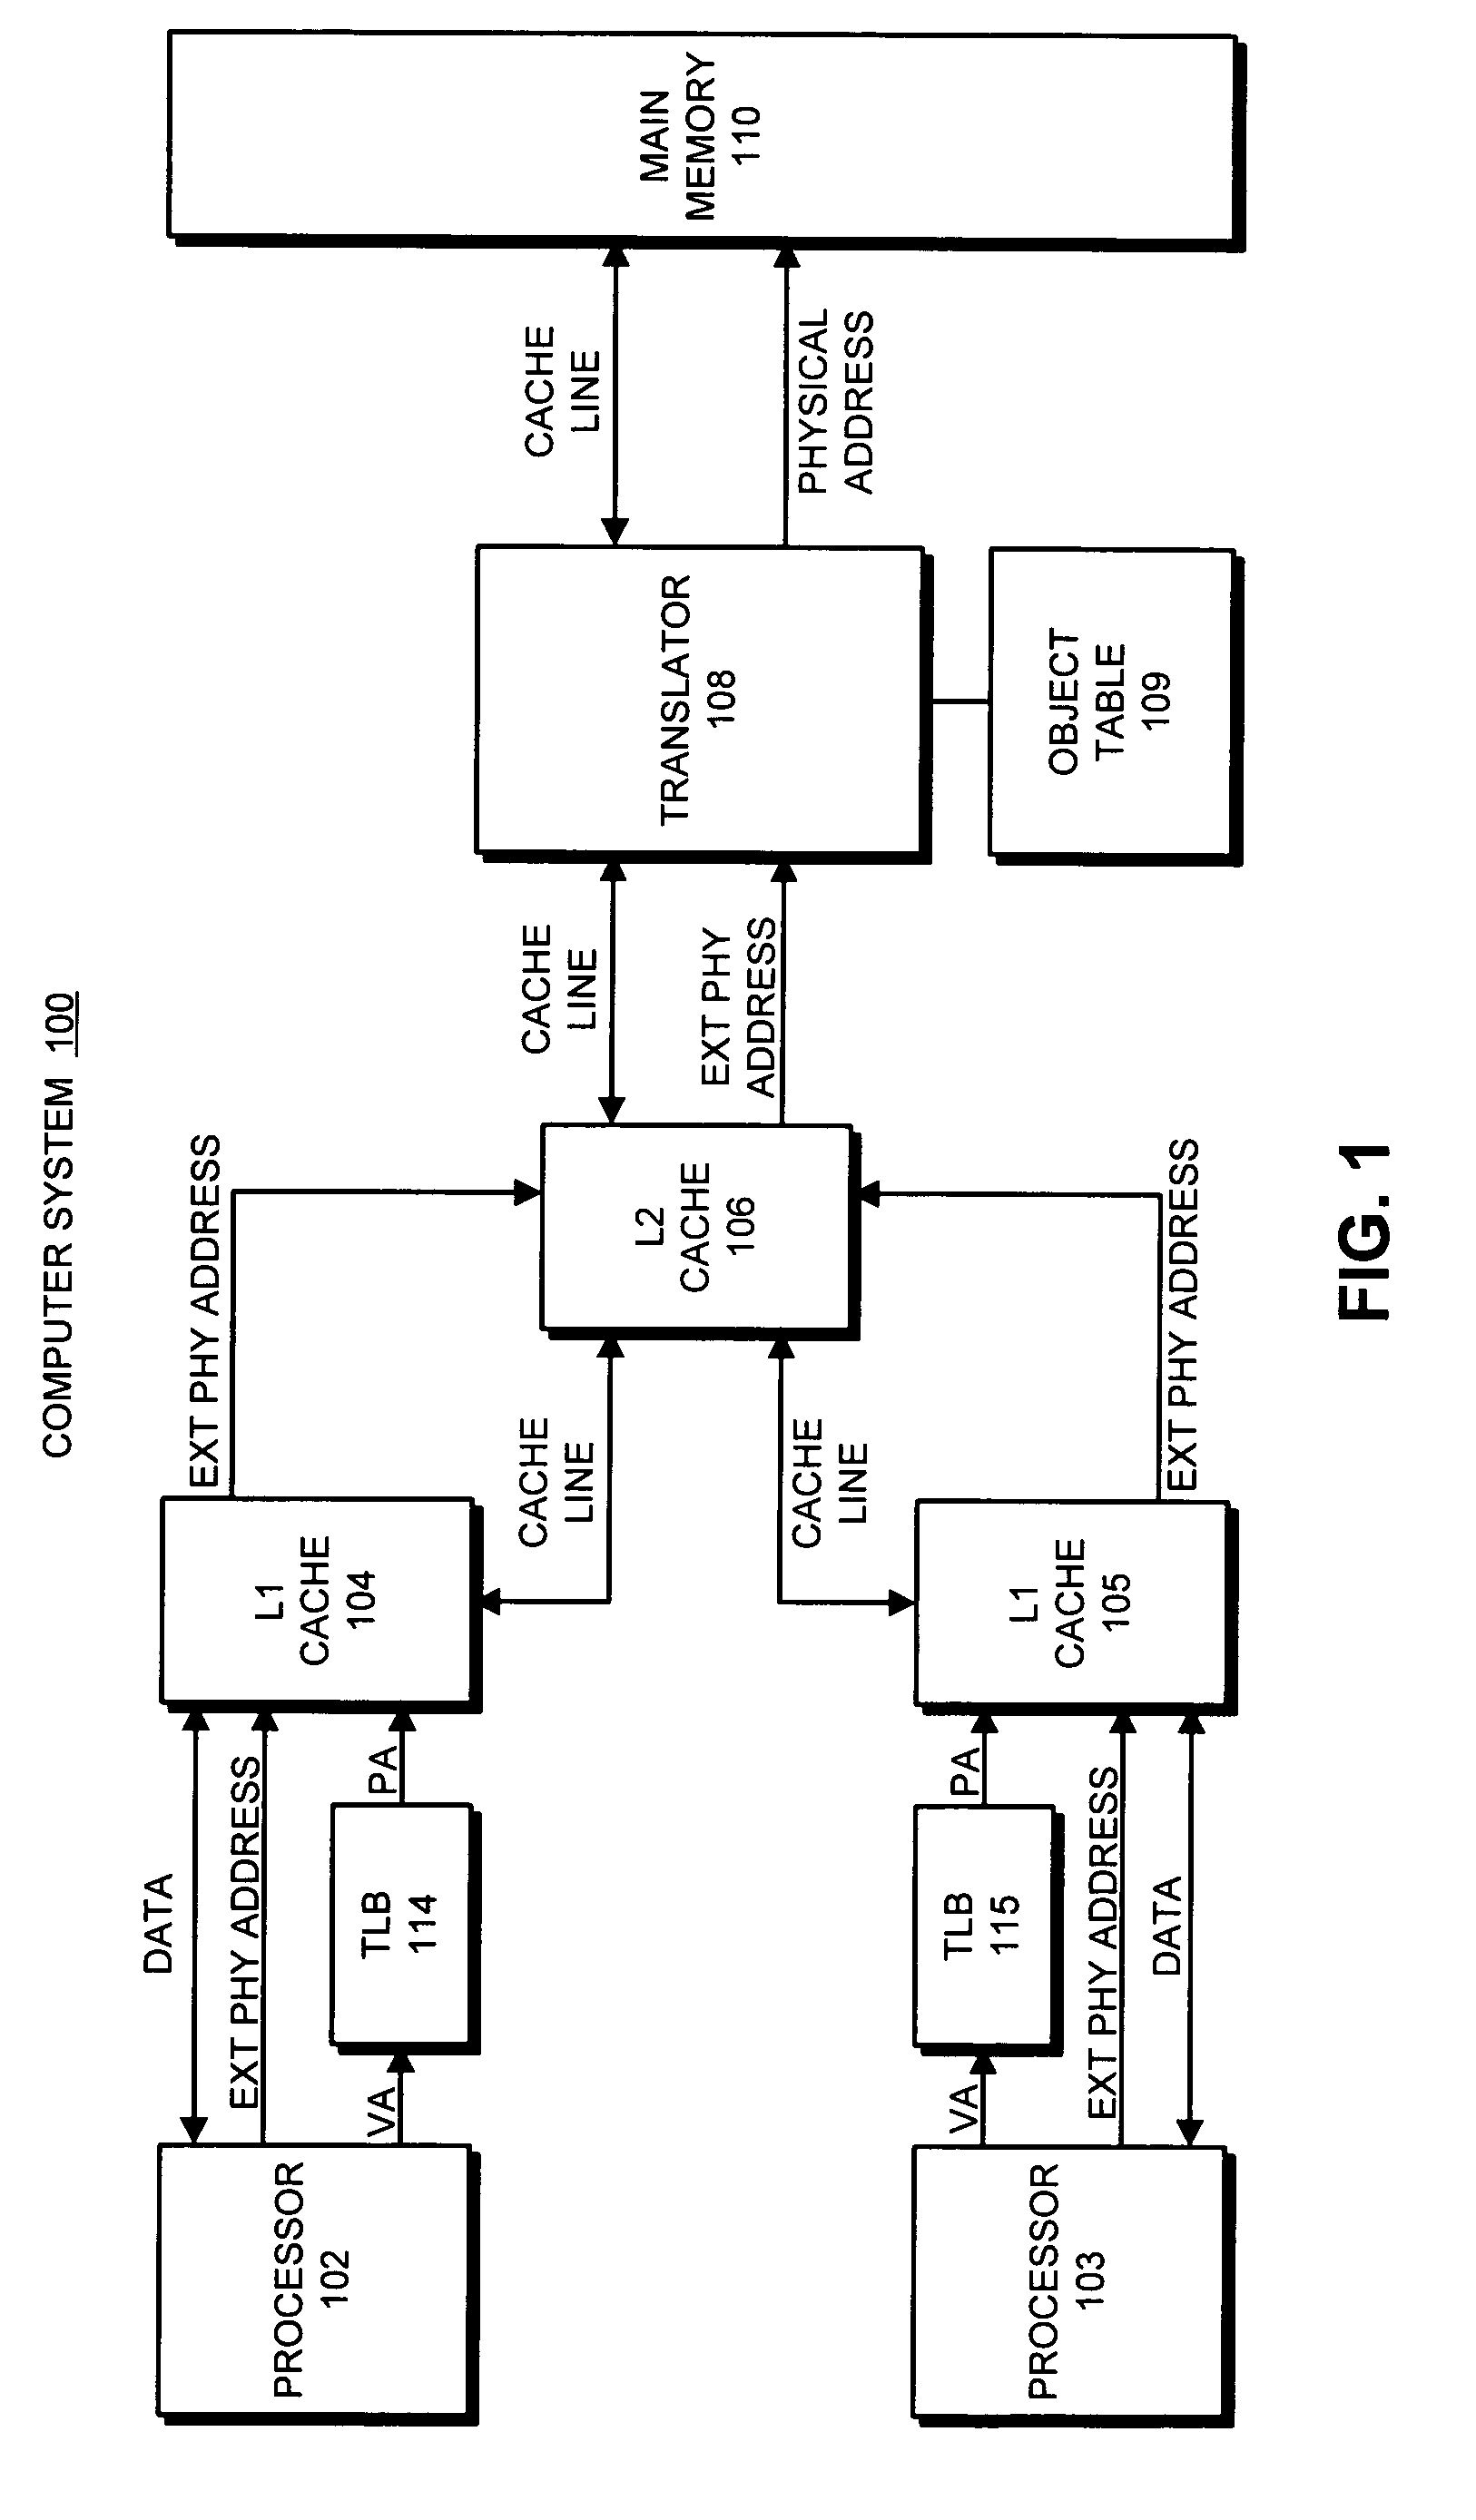 Method and apparatus for supporting read-only objects within an object-addressed memory hierarchy